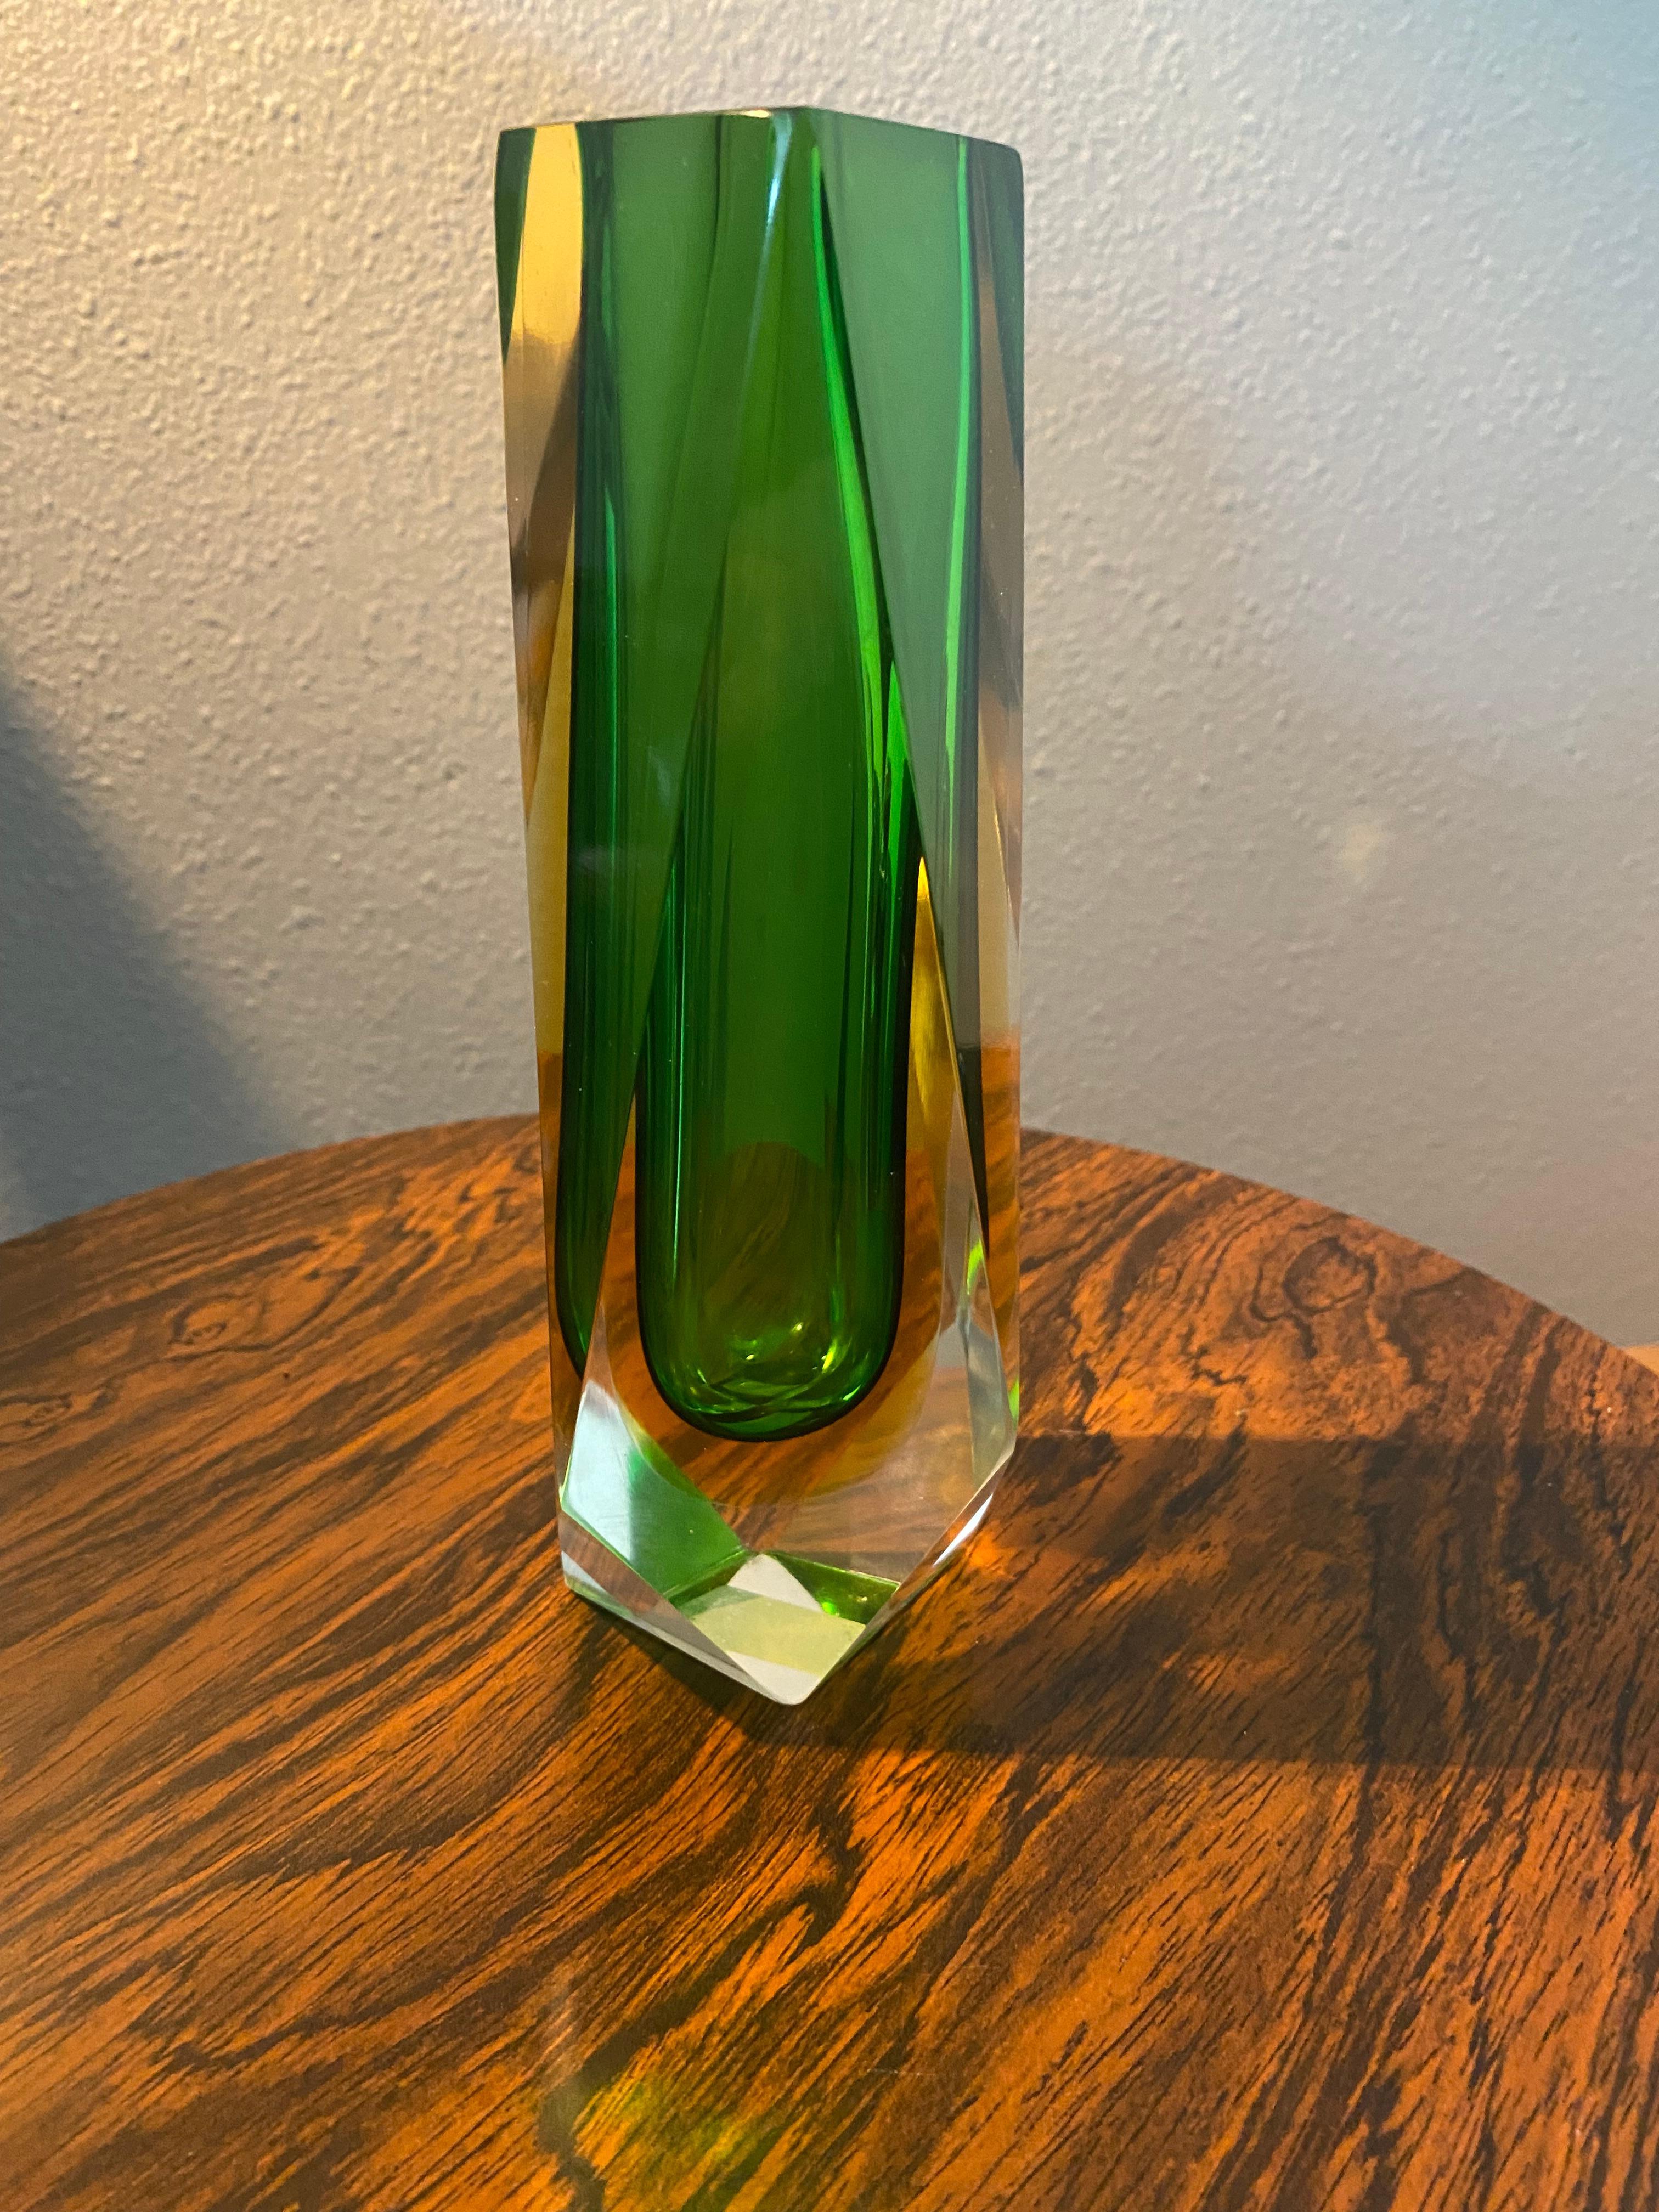 Beautiful green/yellow midcentury Italian Murano glass vase. Made using the Sommerso (submerged) glass technique.